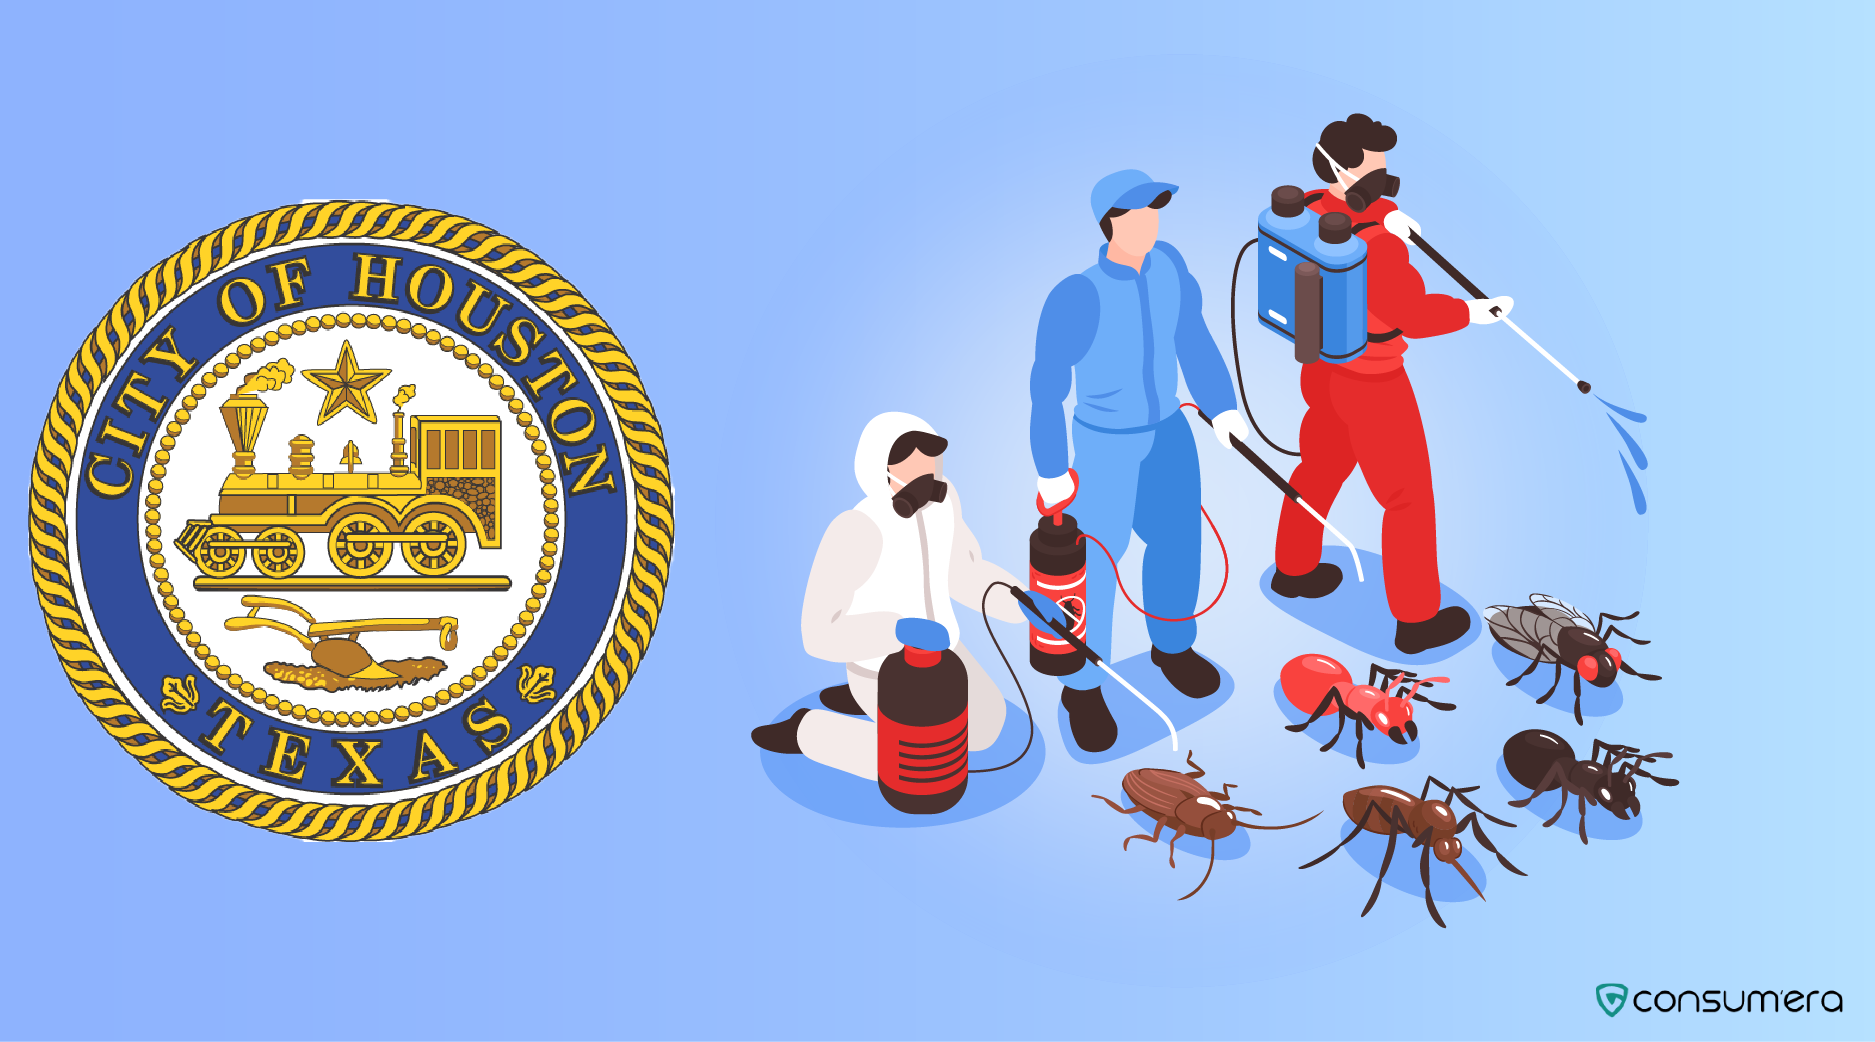 an image consisting of Houston city symbol and pest control professionals trying to keep the city clean.